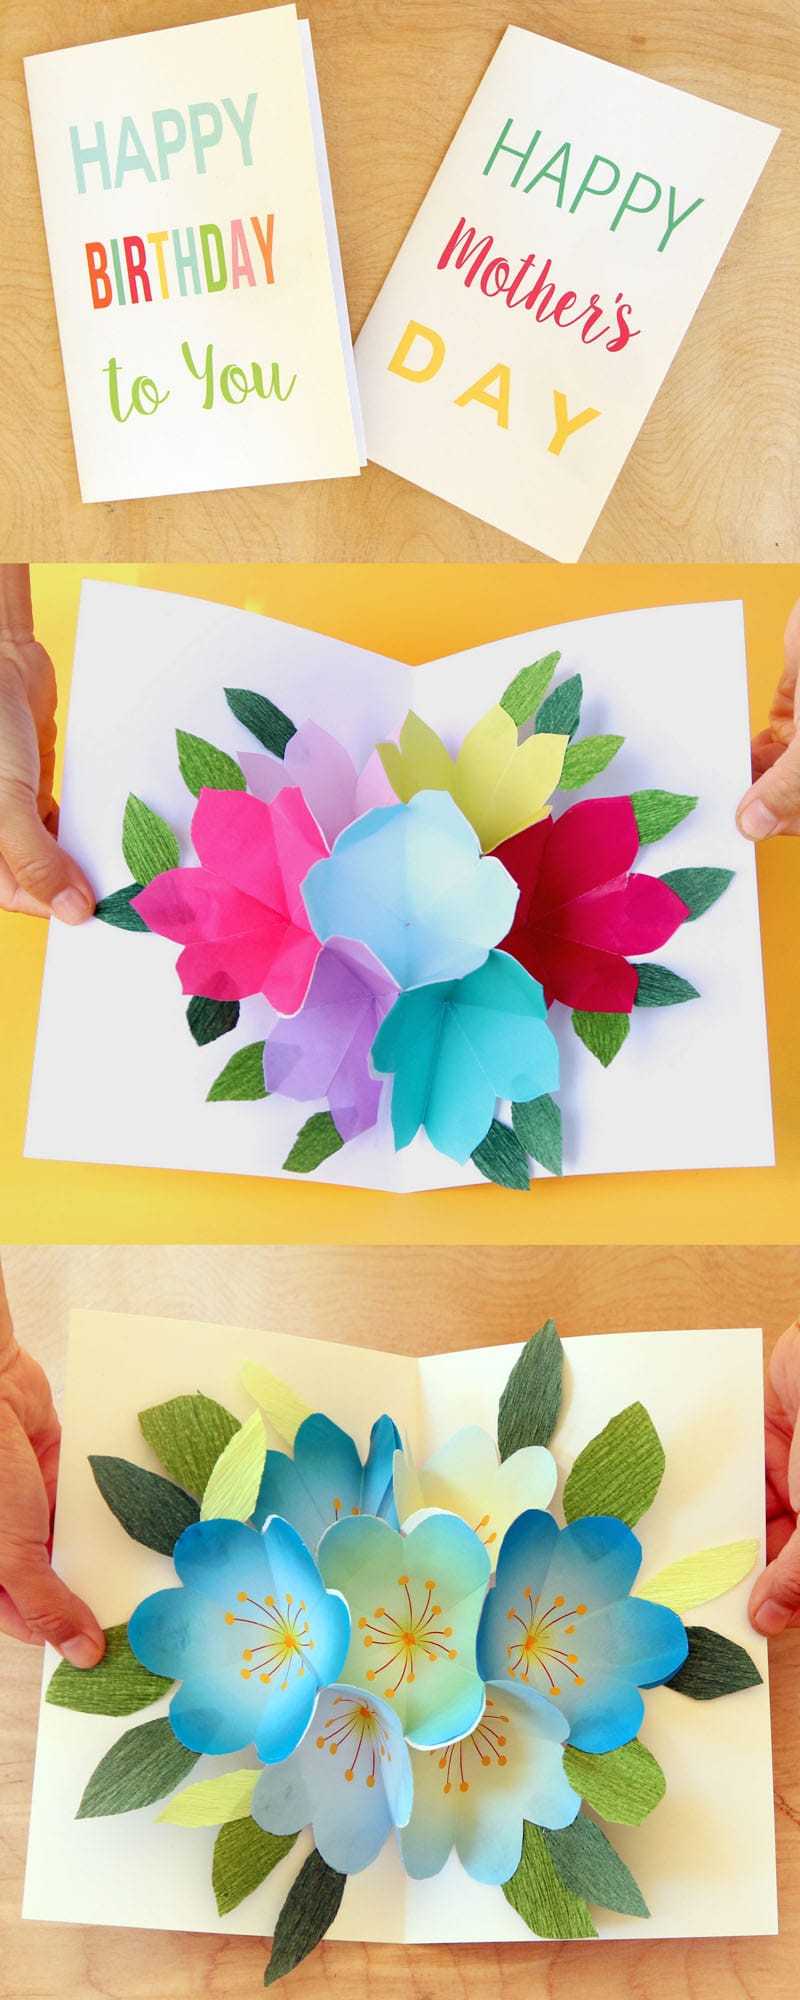 Free Printable Happy Birthday Card With Pop Up Bouquet – A Regarding Printable Pop Up Card Templates Free